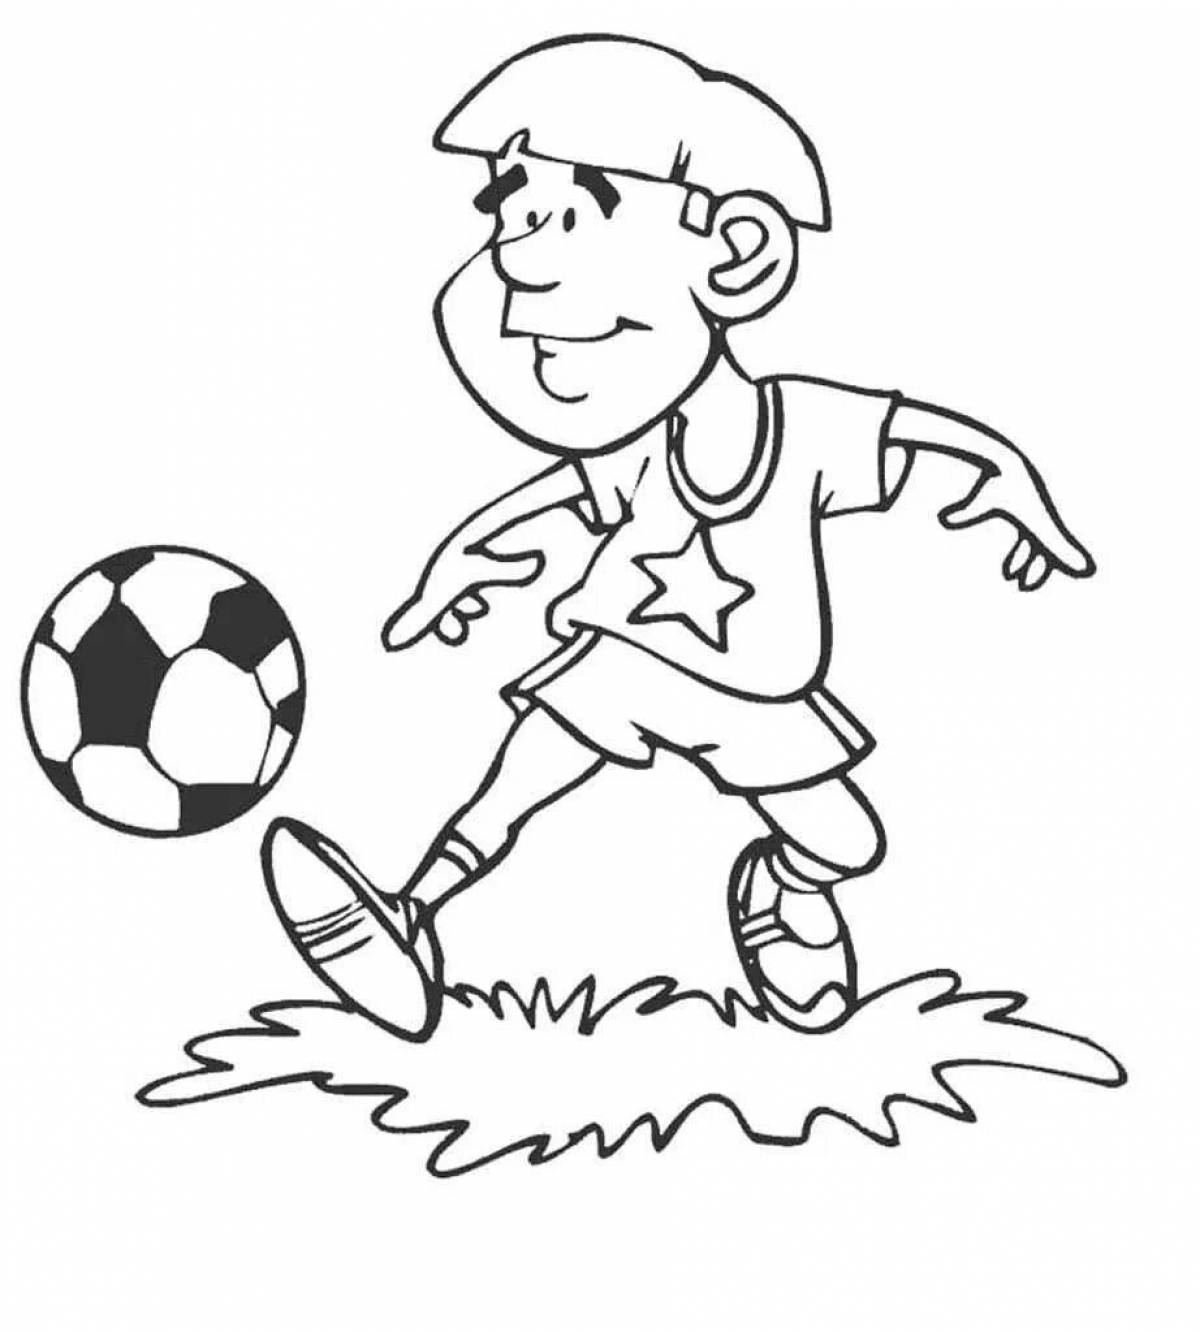 Fabulous soccer player coloring book for kids